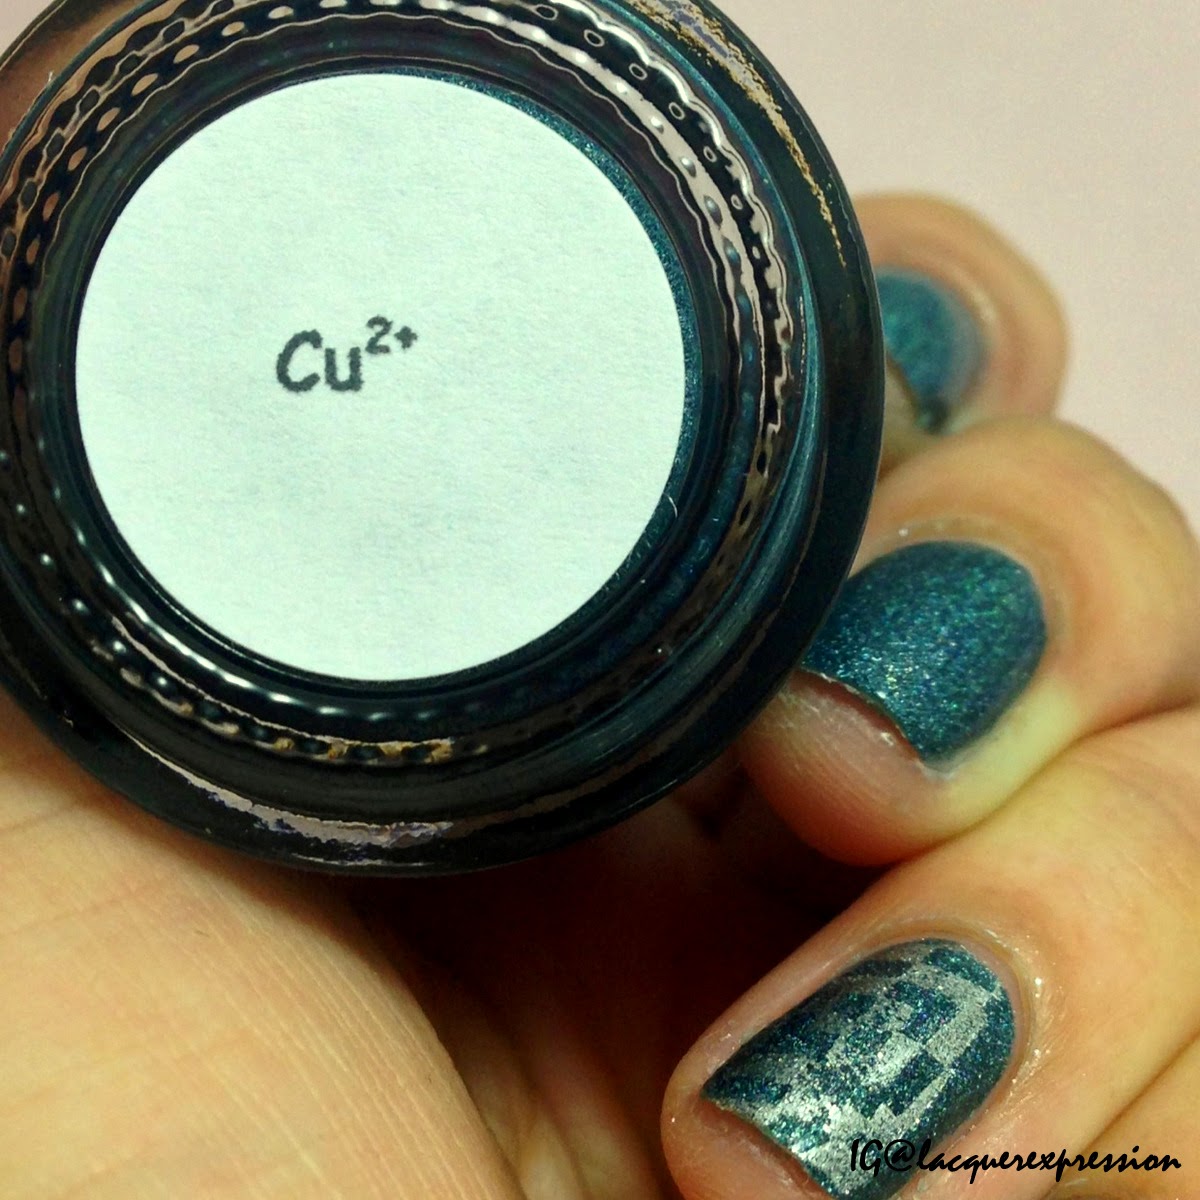 swatch and review of cu2+ nail polish by chirality